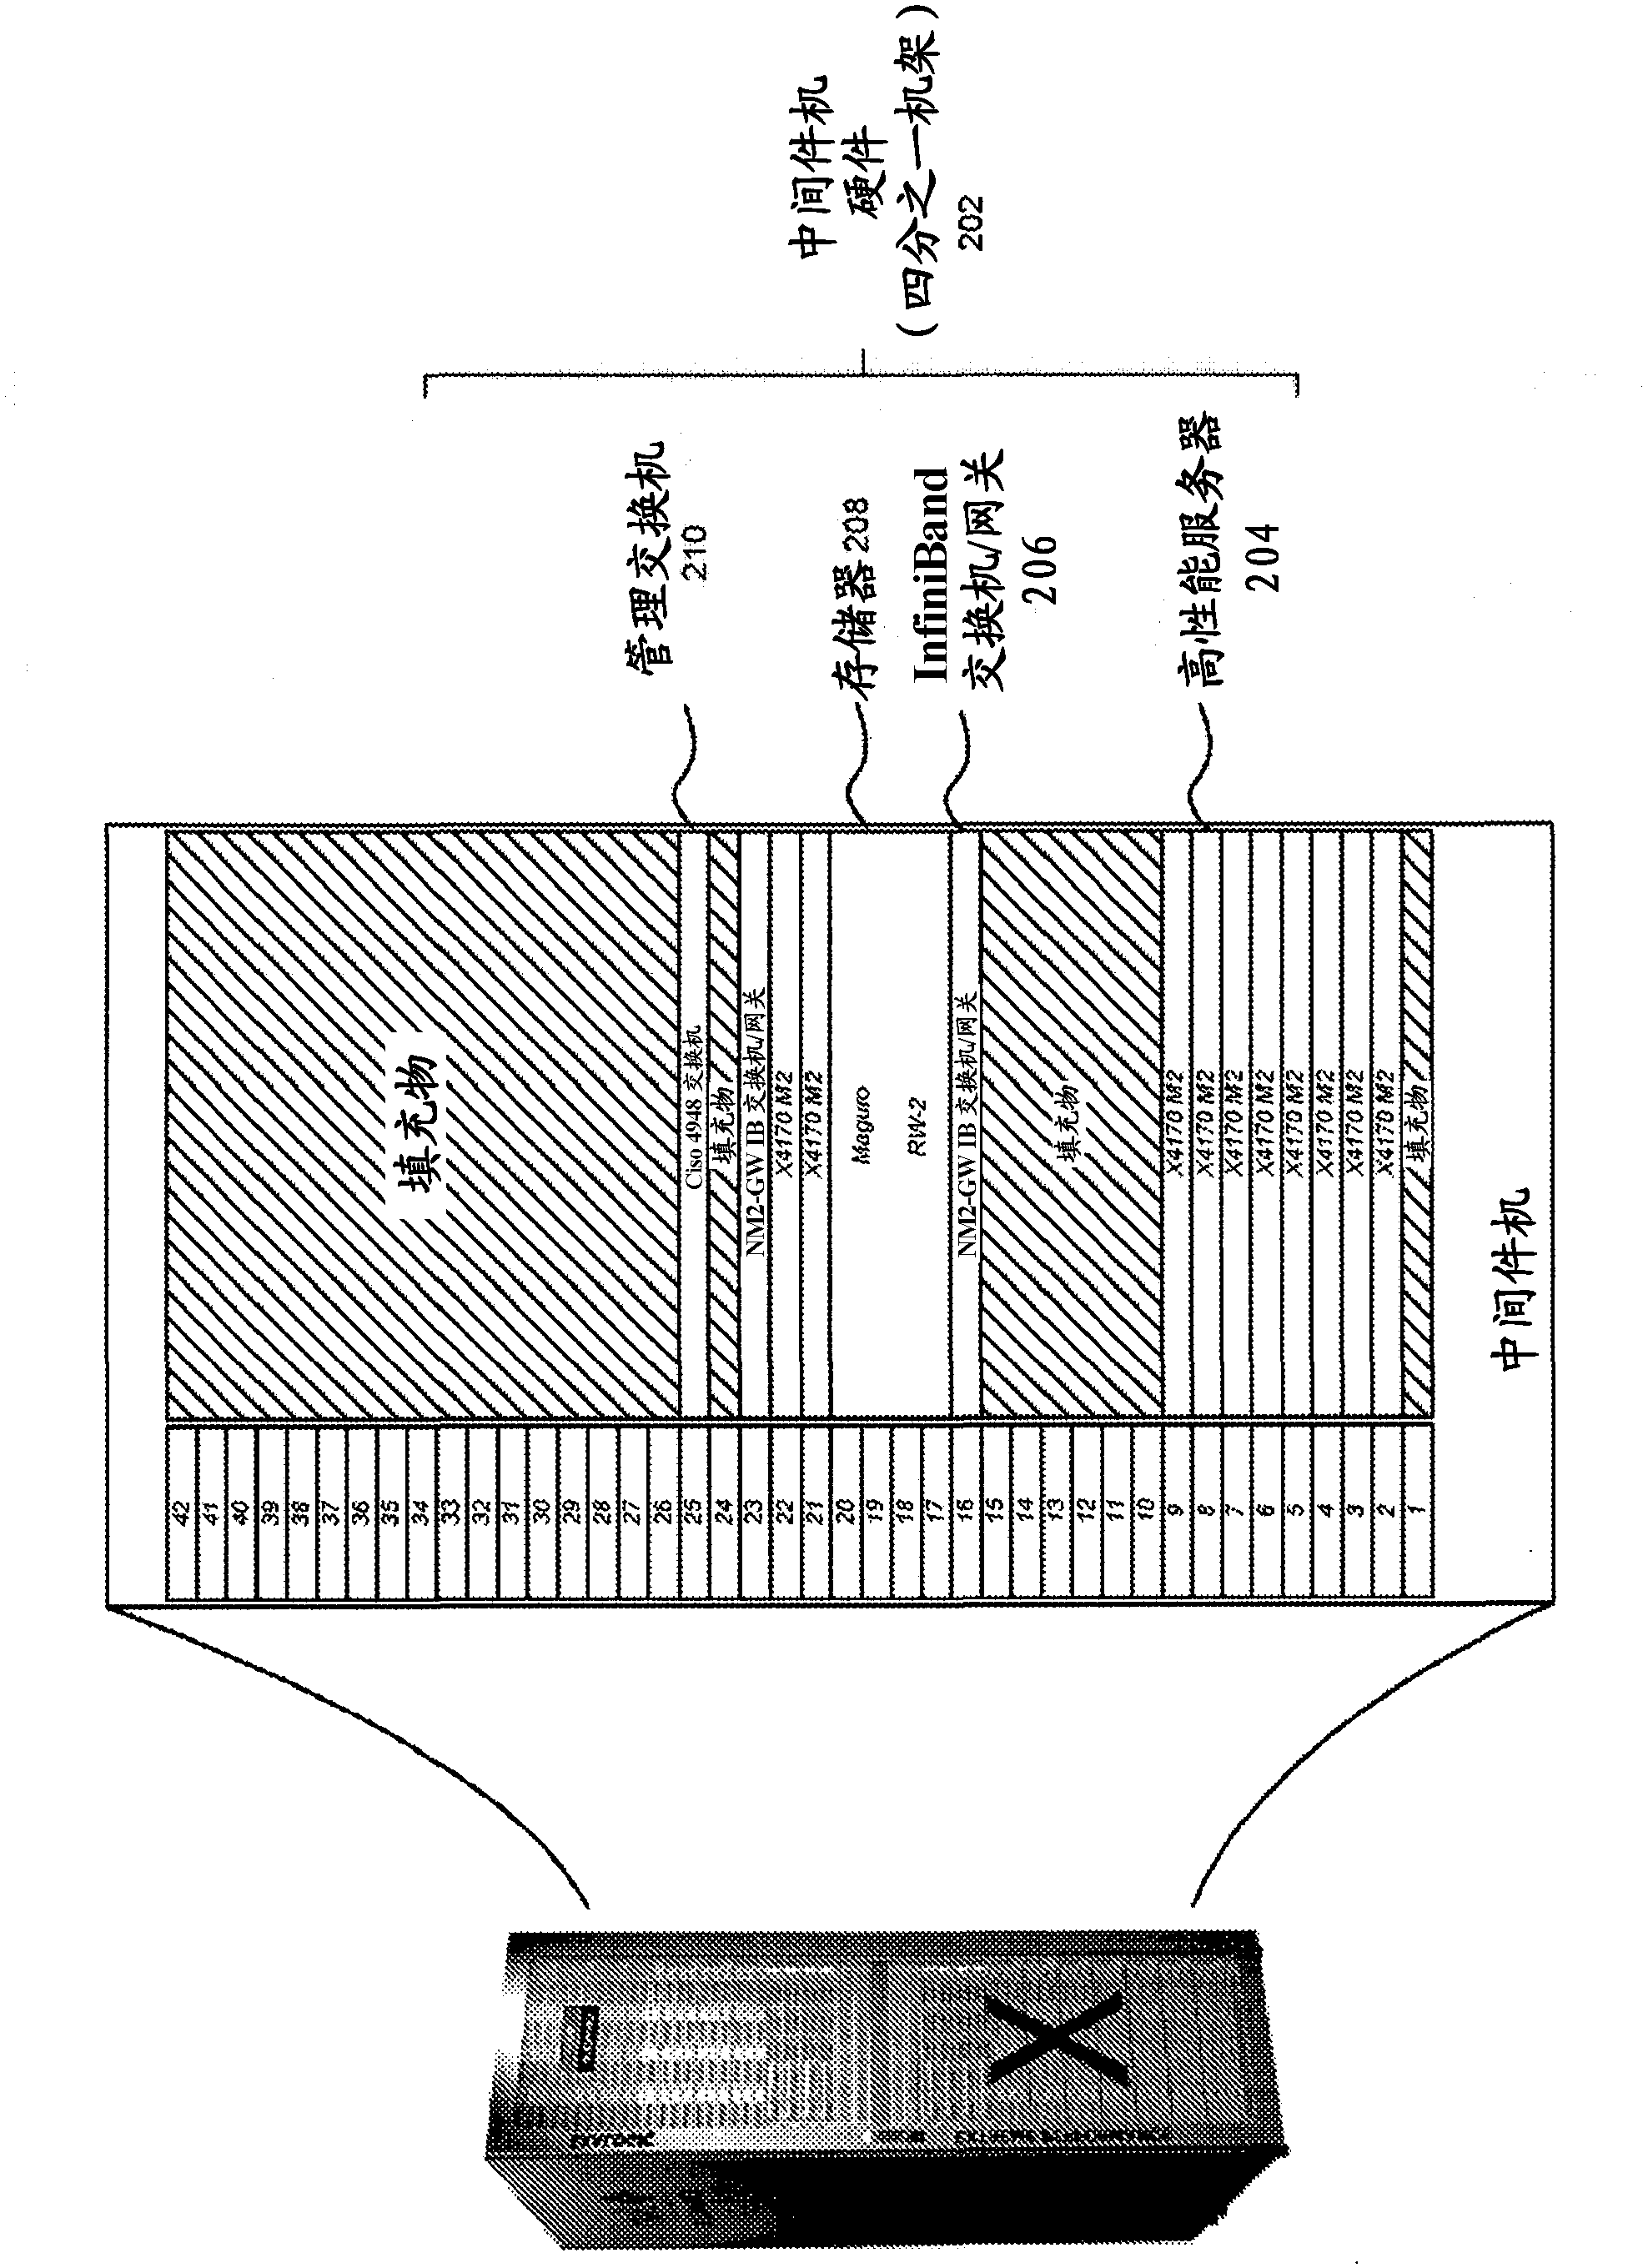 System including a middleware machine environment